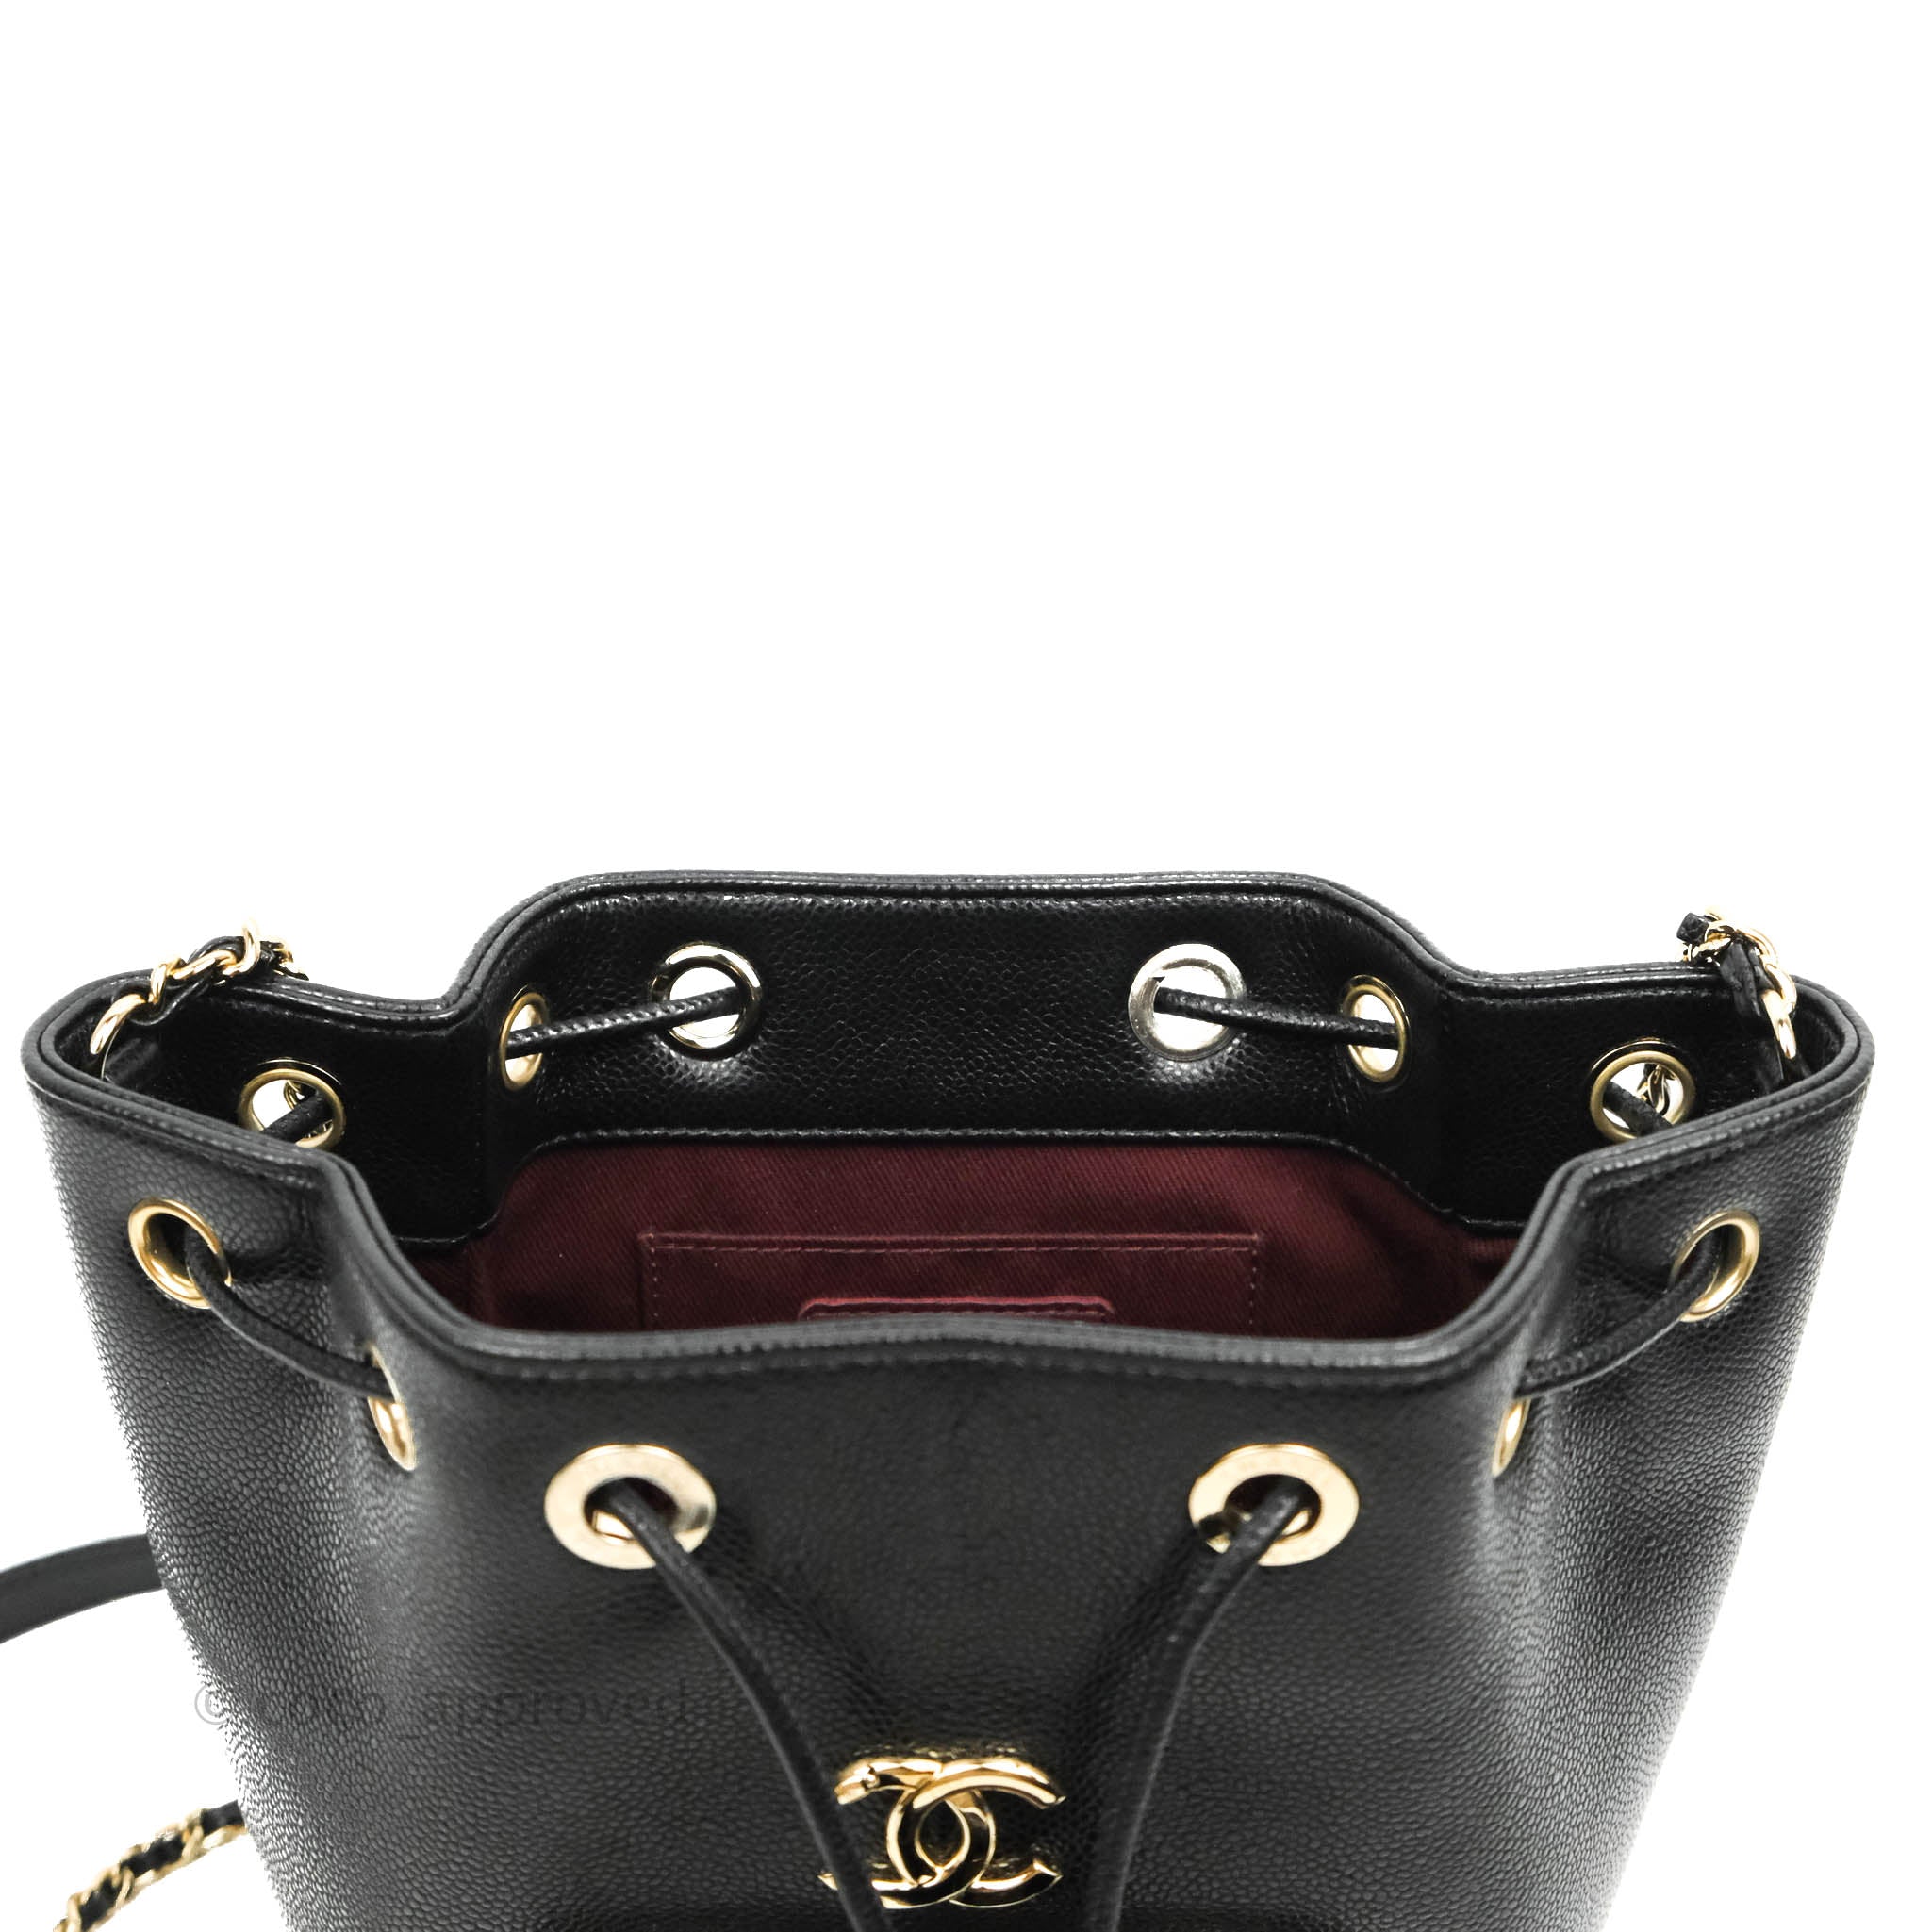 Chanel Quilted Drawstring Pearl Flower Bucket Bag Black Lambskin Aged –  Coco Approved Studio